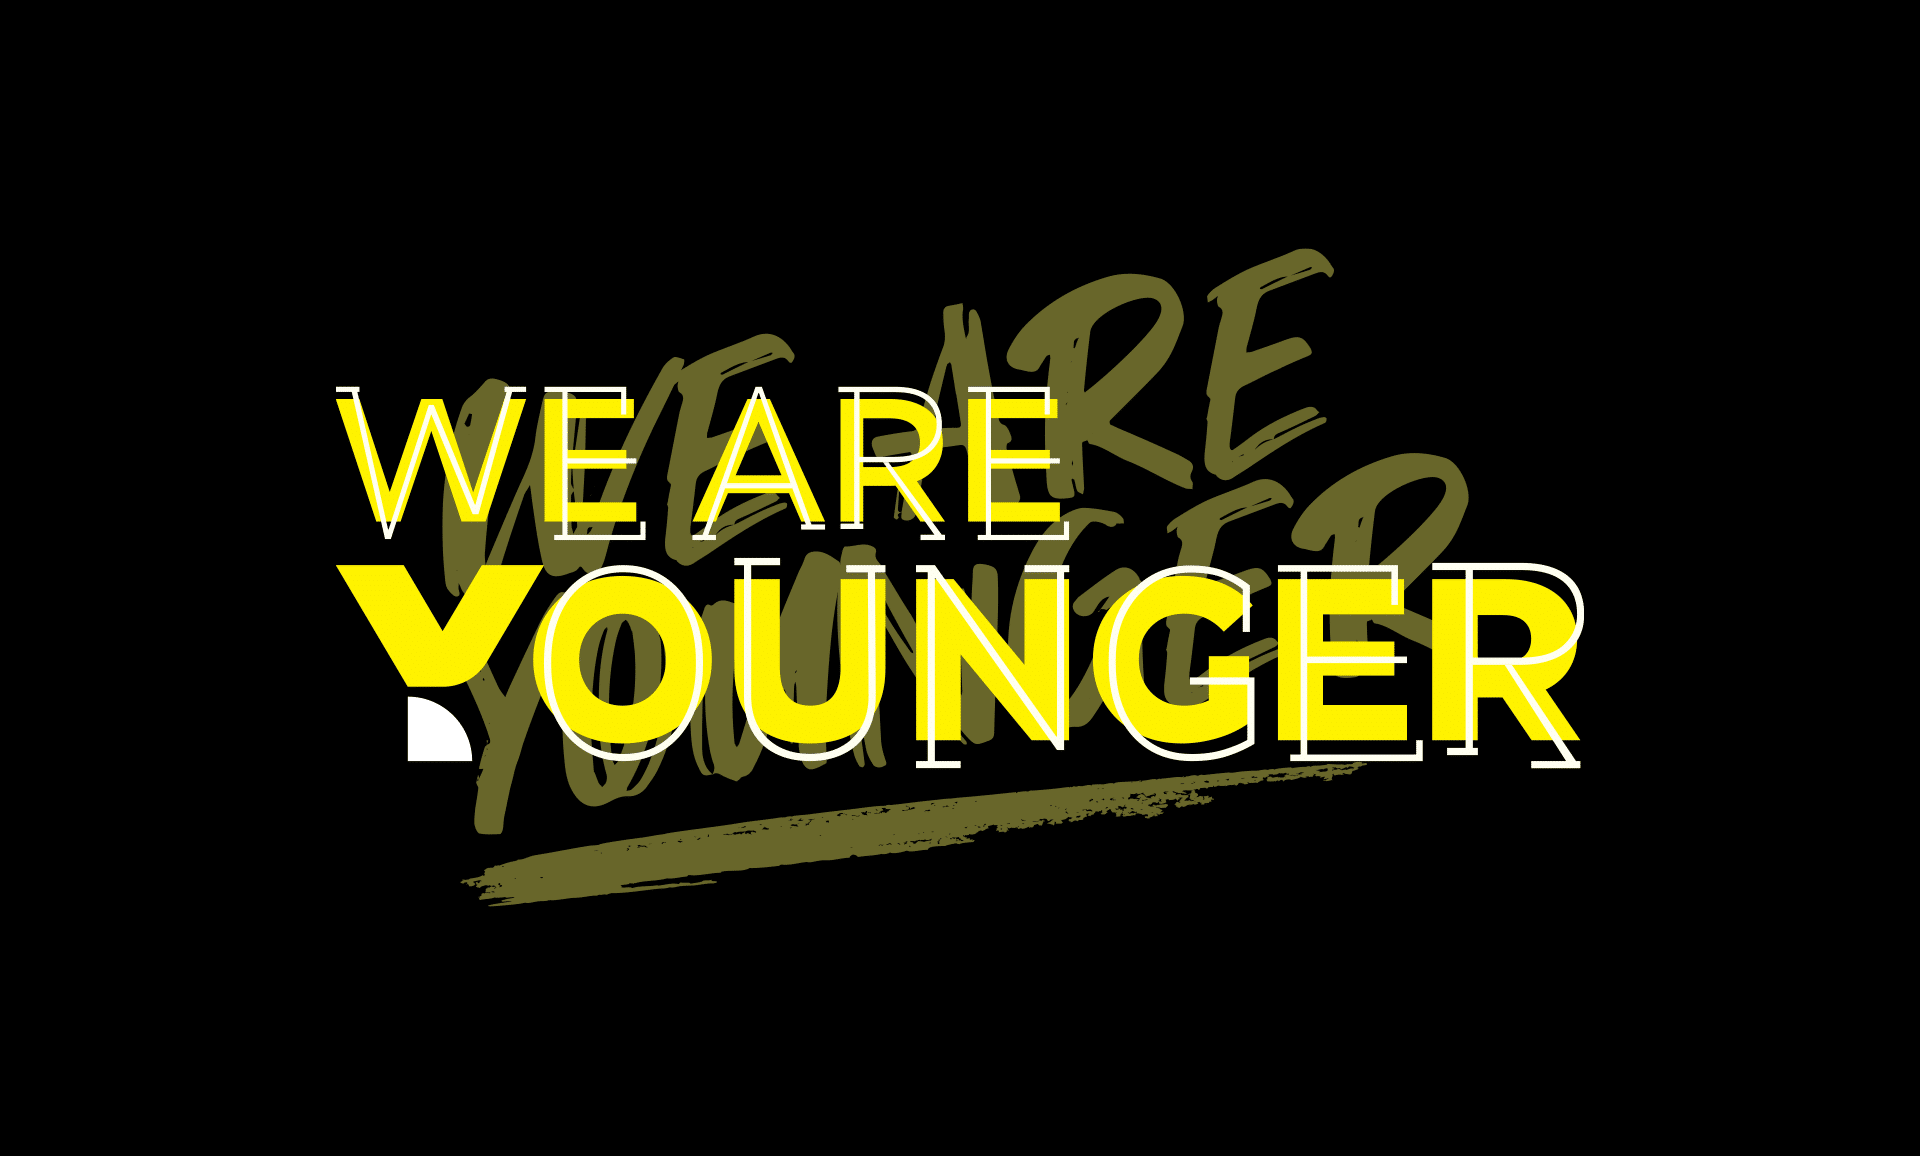 We Are Younger